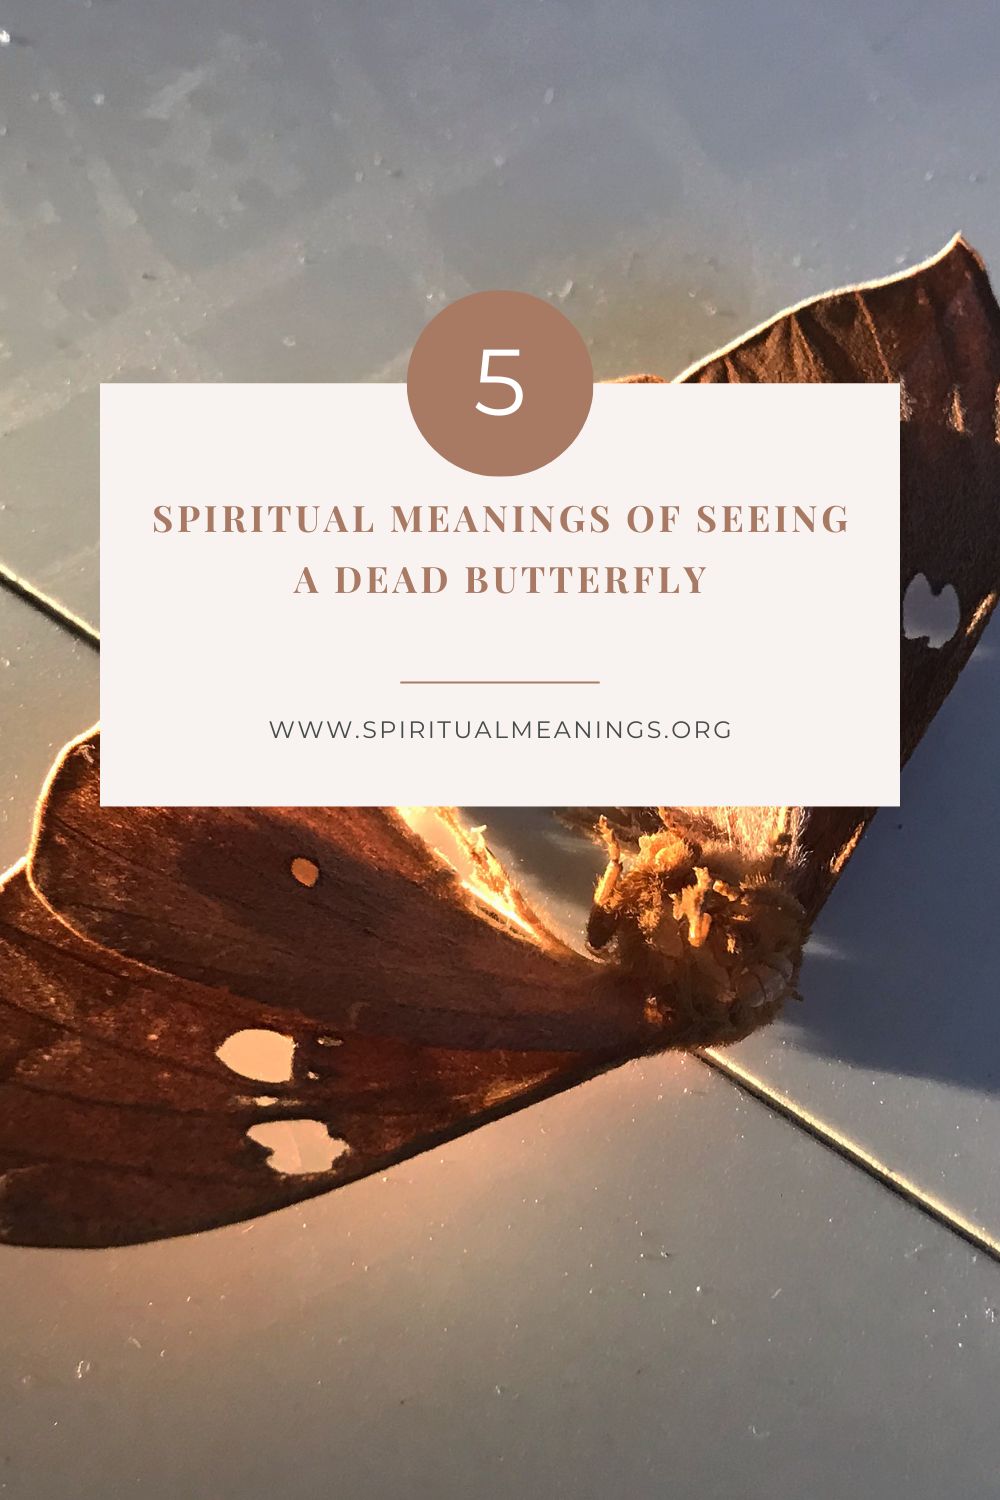 5 Spiritual Meanings of Seeing A Dead Butterfly